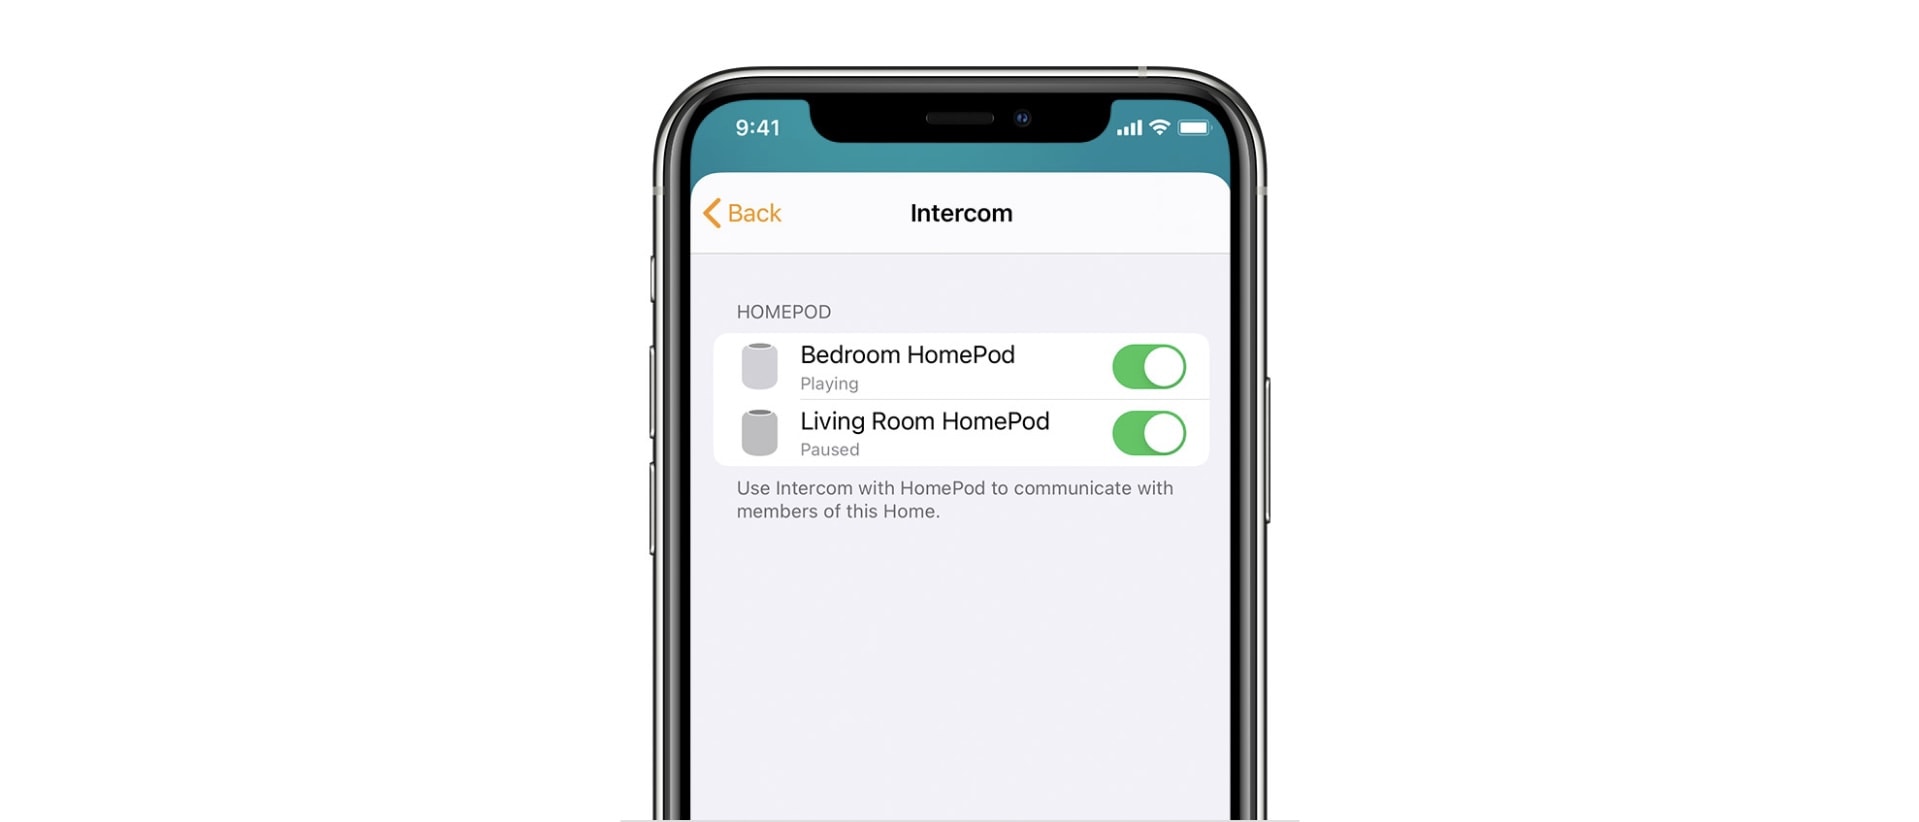 How to use Intercom with HomePods: First, you must enable Intercom inside the Home app